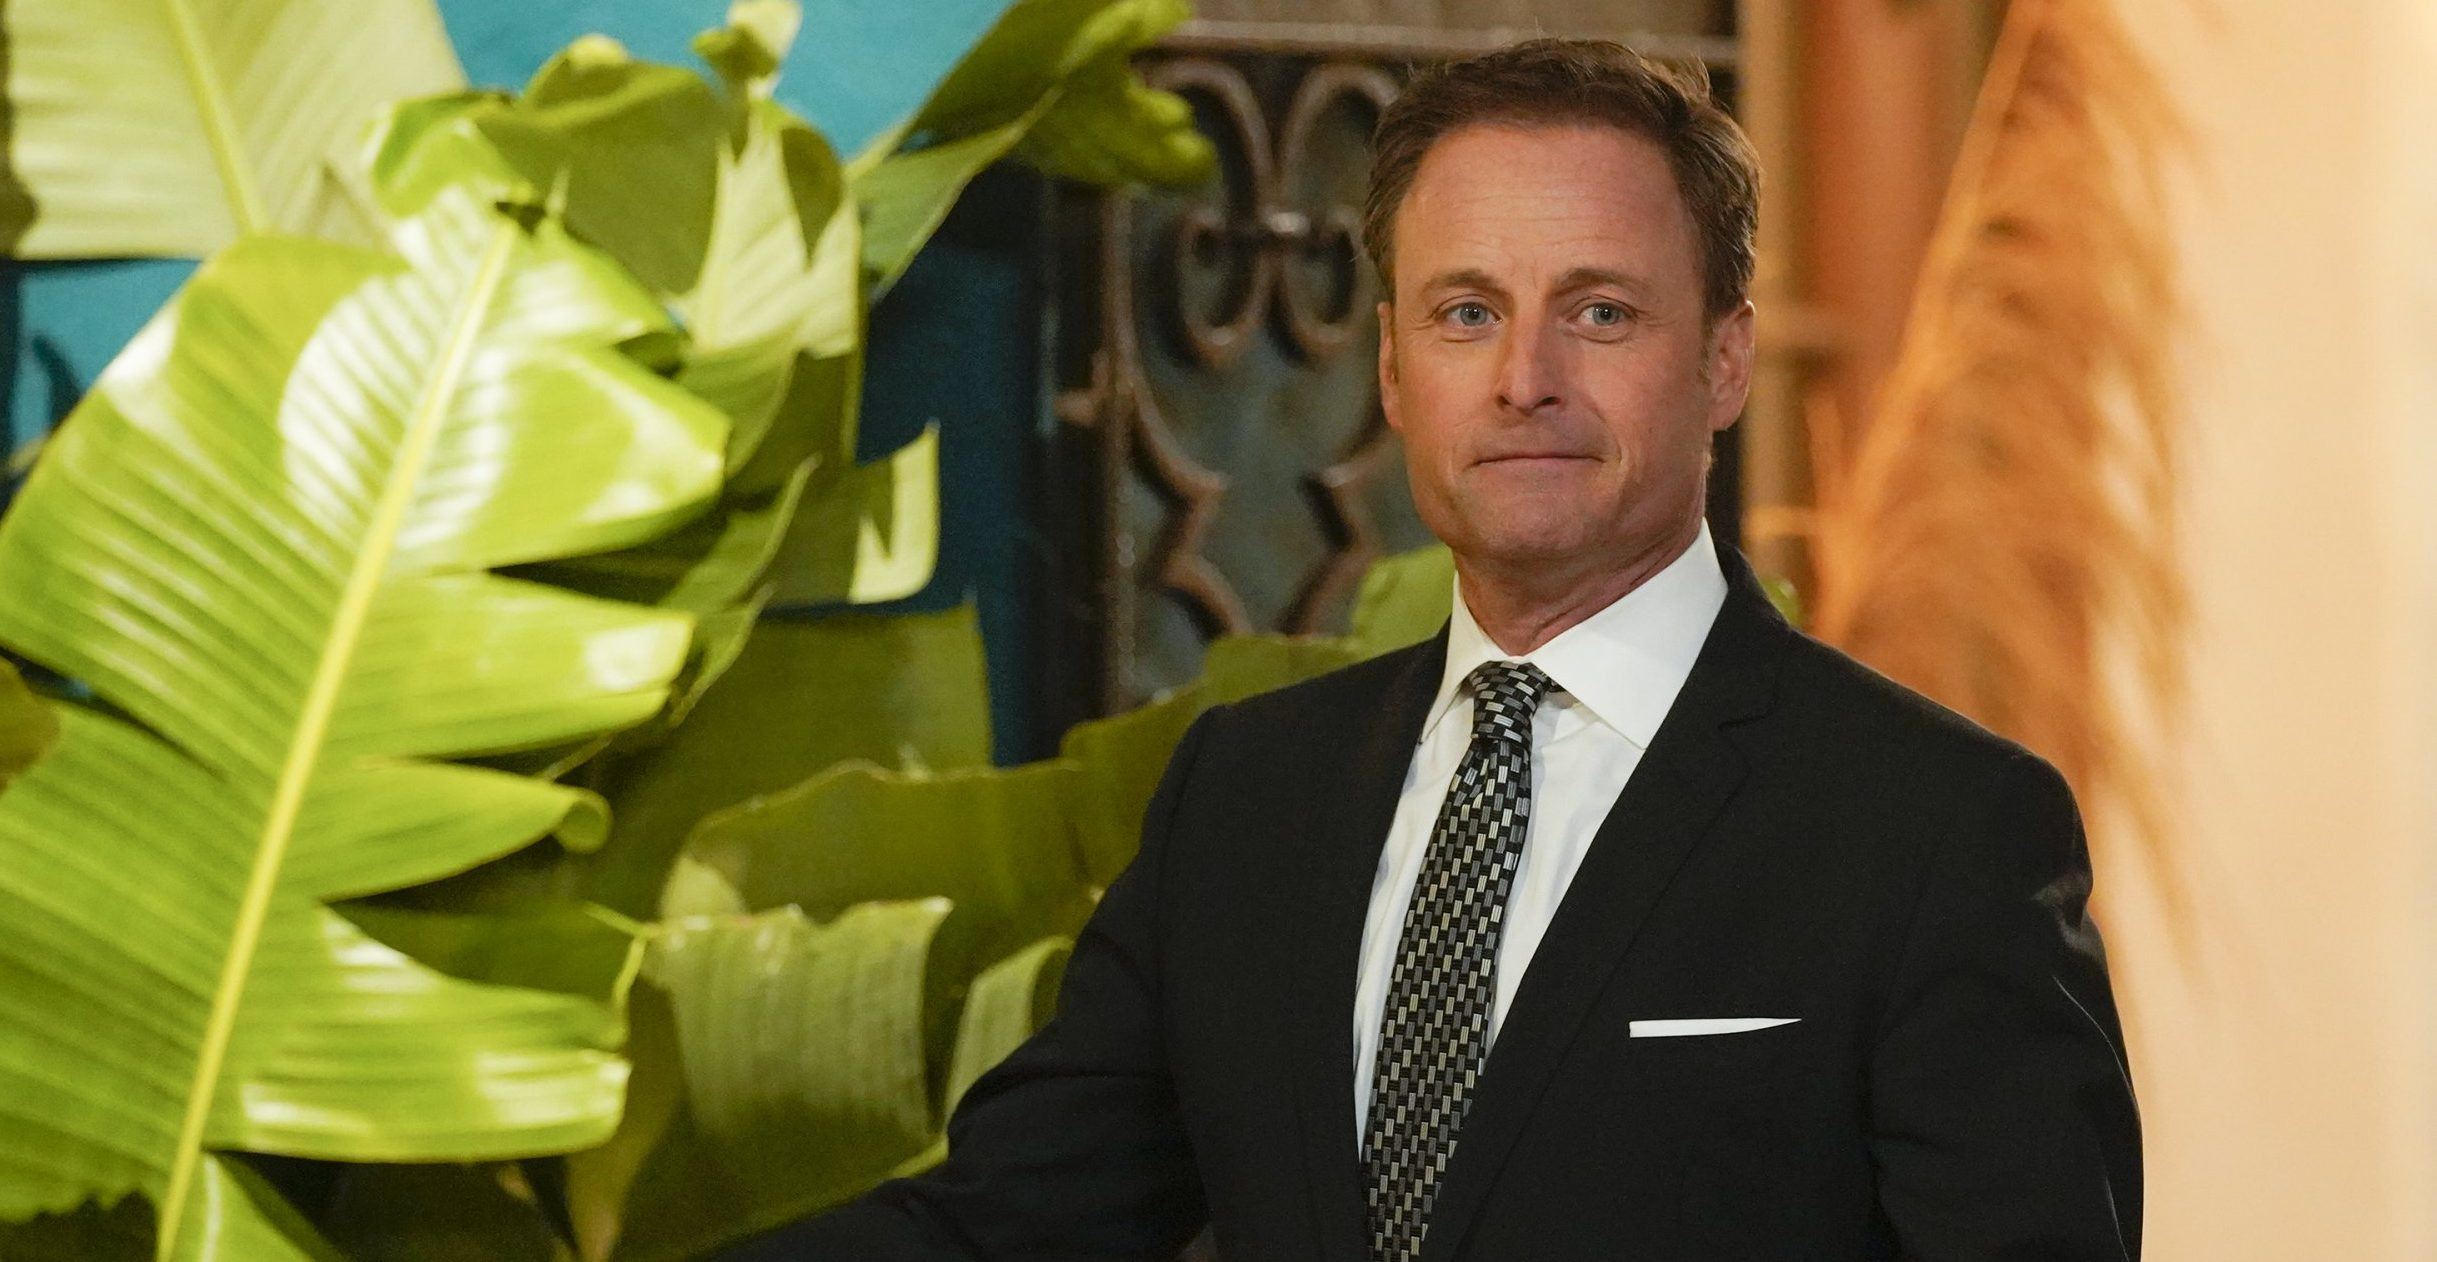 The Bachelor: Former host Chris Harrison to receive ‘$9million payout’ for franchise exit following racism scandal